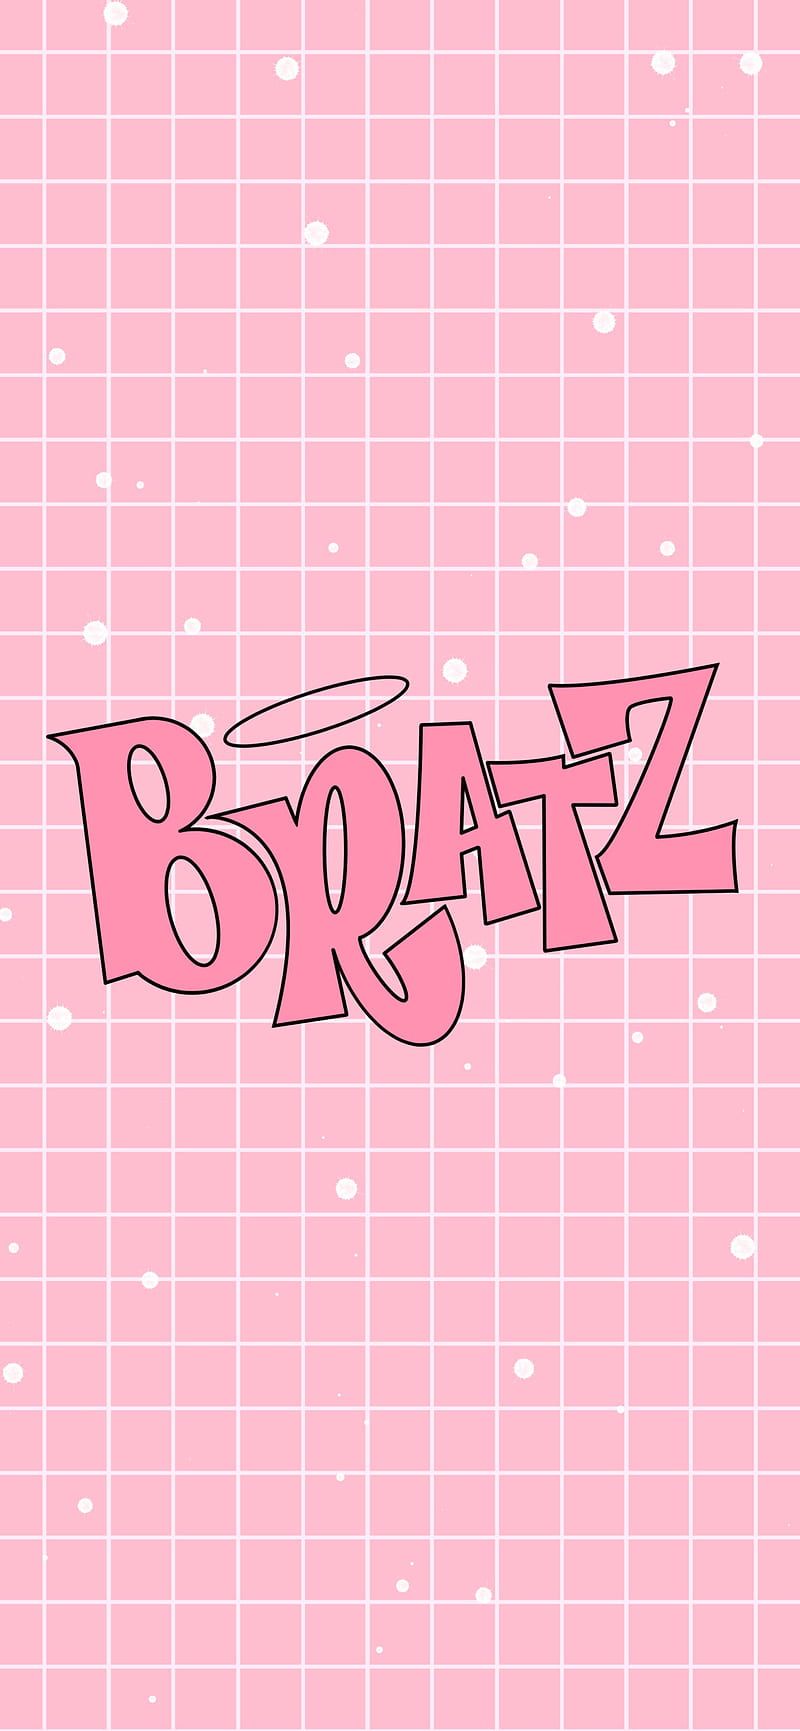 A pink background with the word braz written in white - Baddie